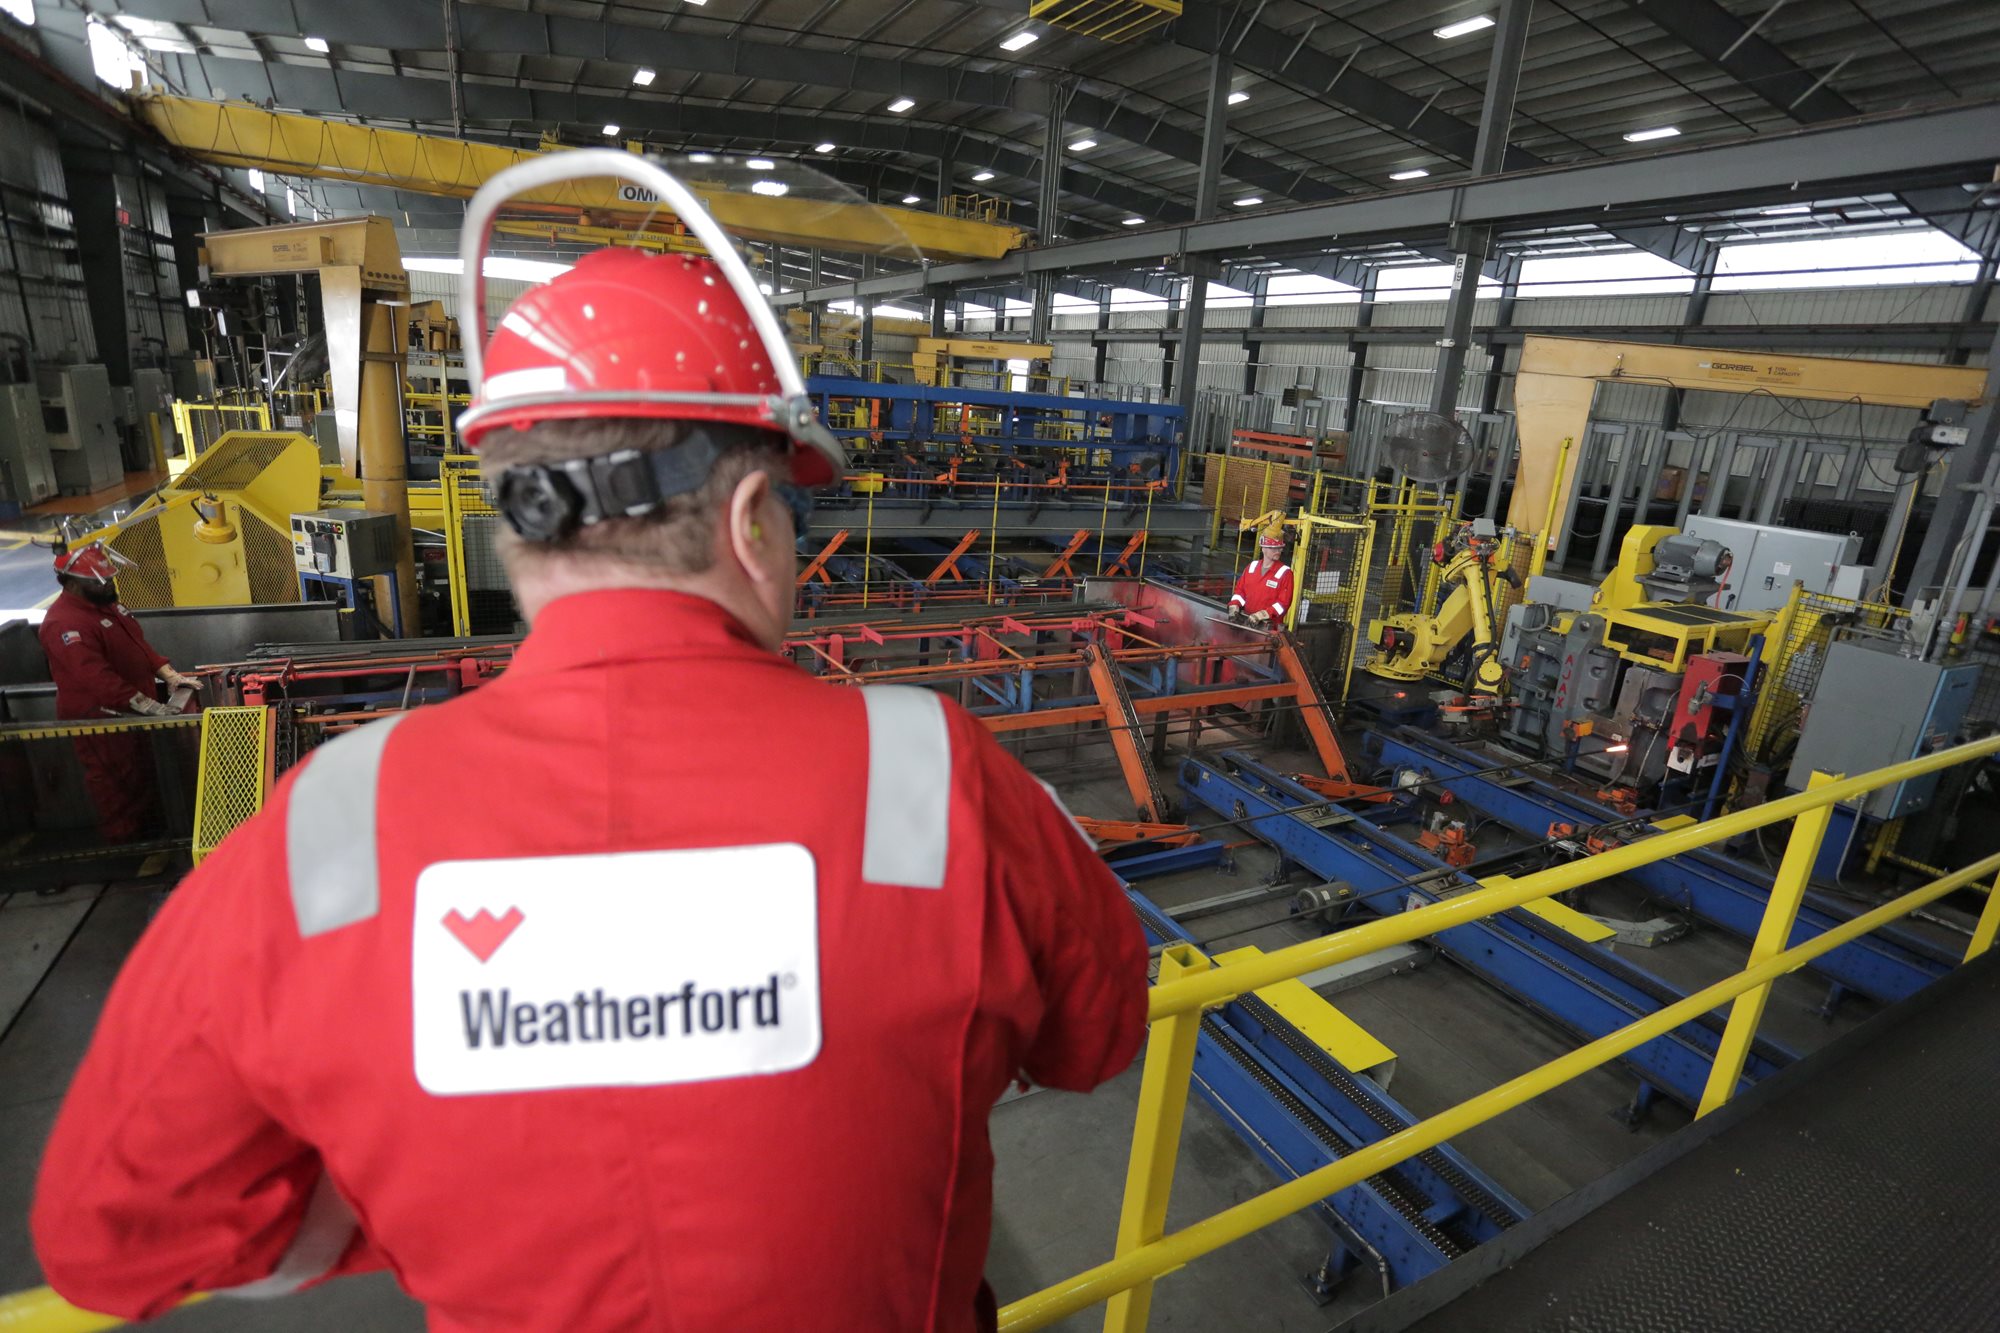 The Weatherford sucker-rod manufacturing facility in Greenville, Texas, achieved API Q1 and ISO 9001:2015 certifications with zero nonconformities.